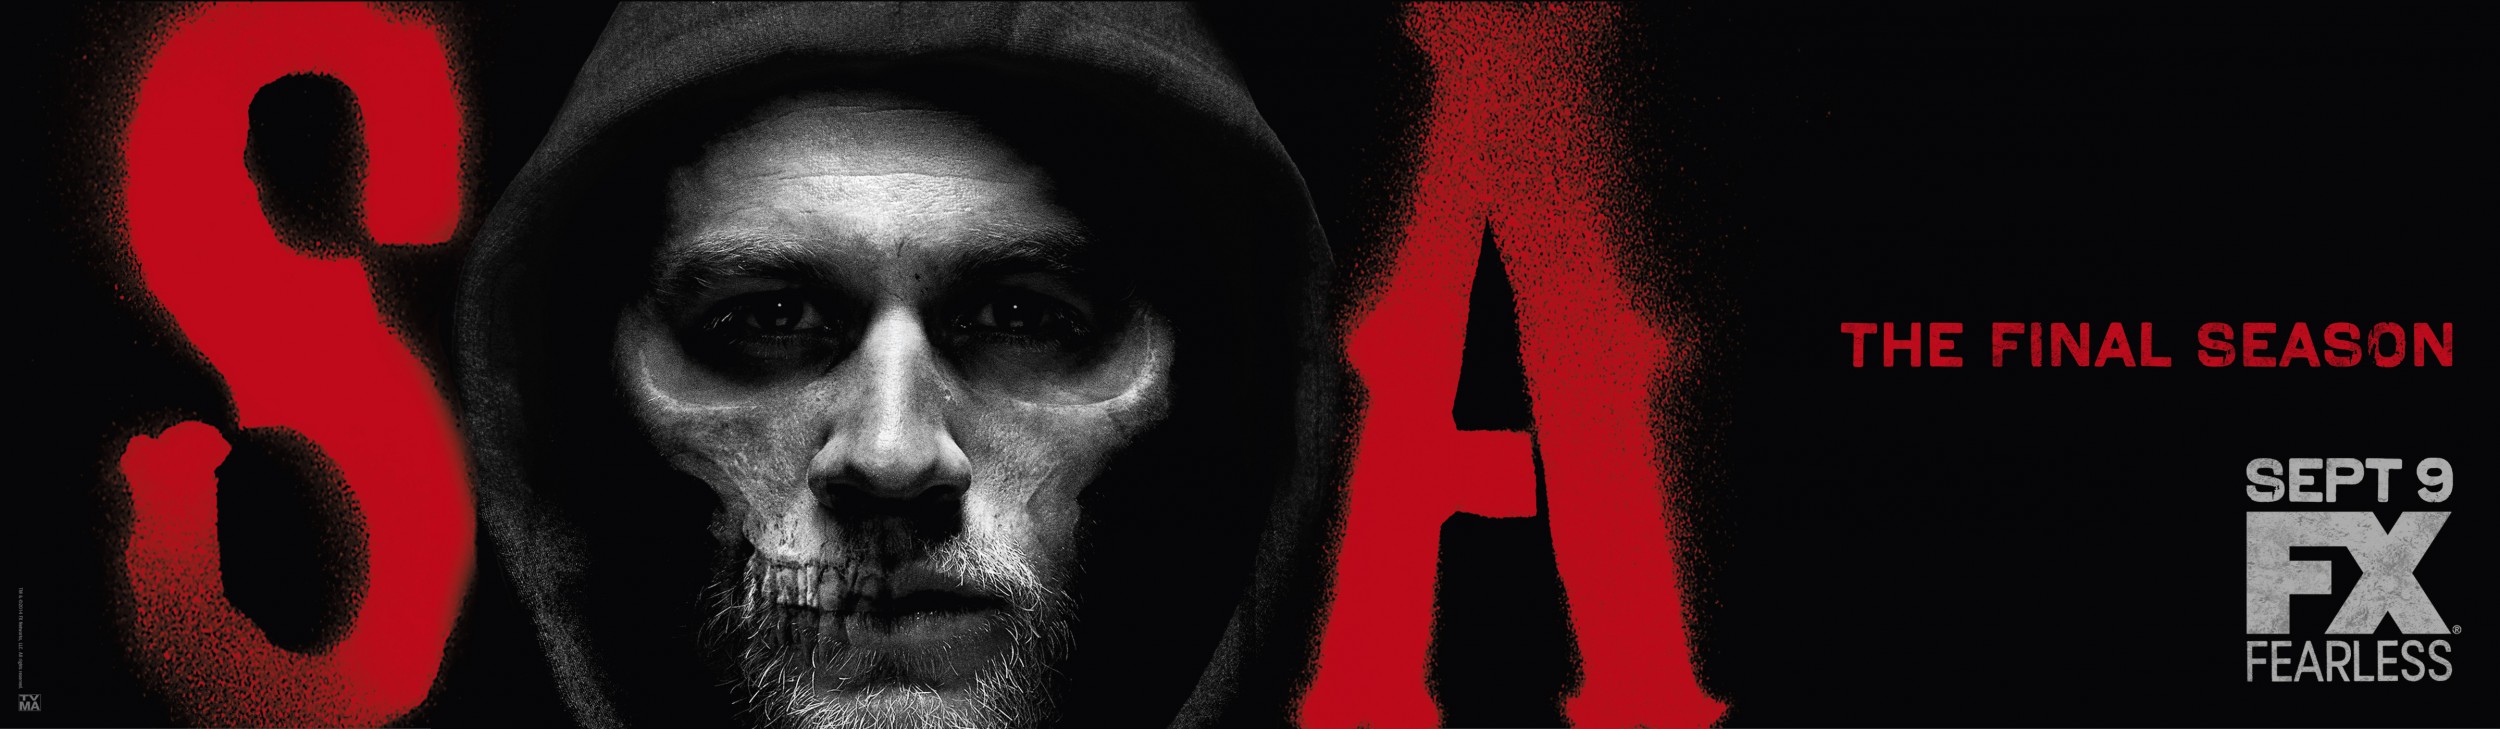 Mega Sized TV Poster Image for Sons of Anarchy (#23 of 24)